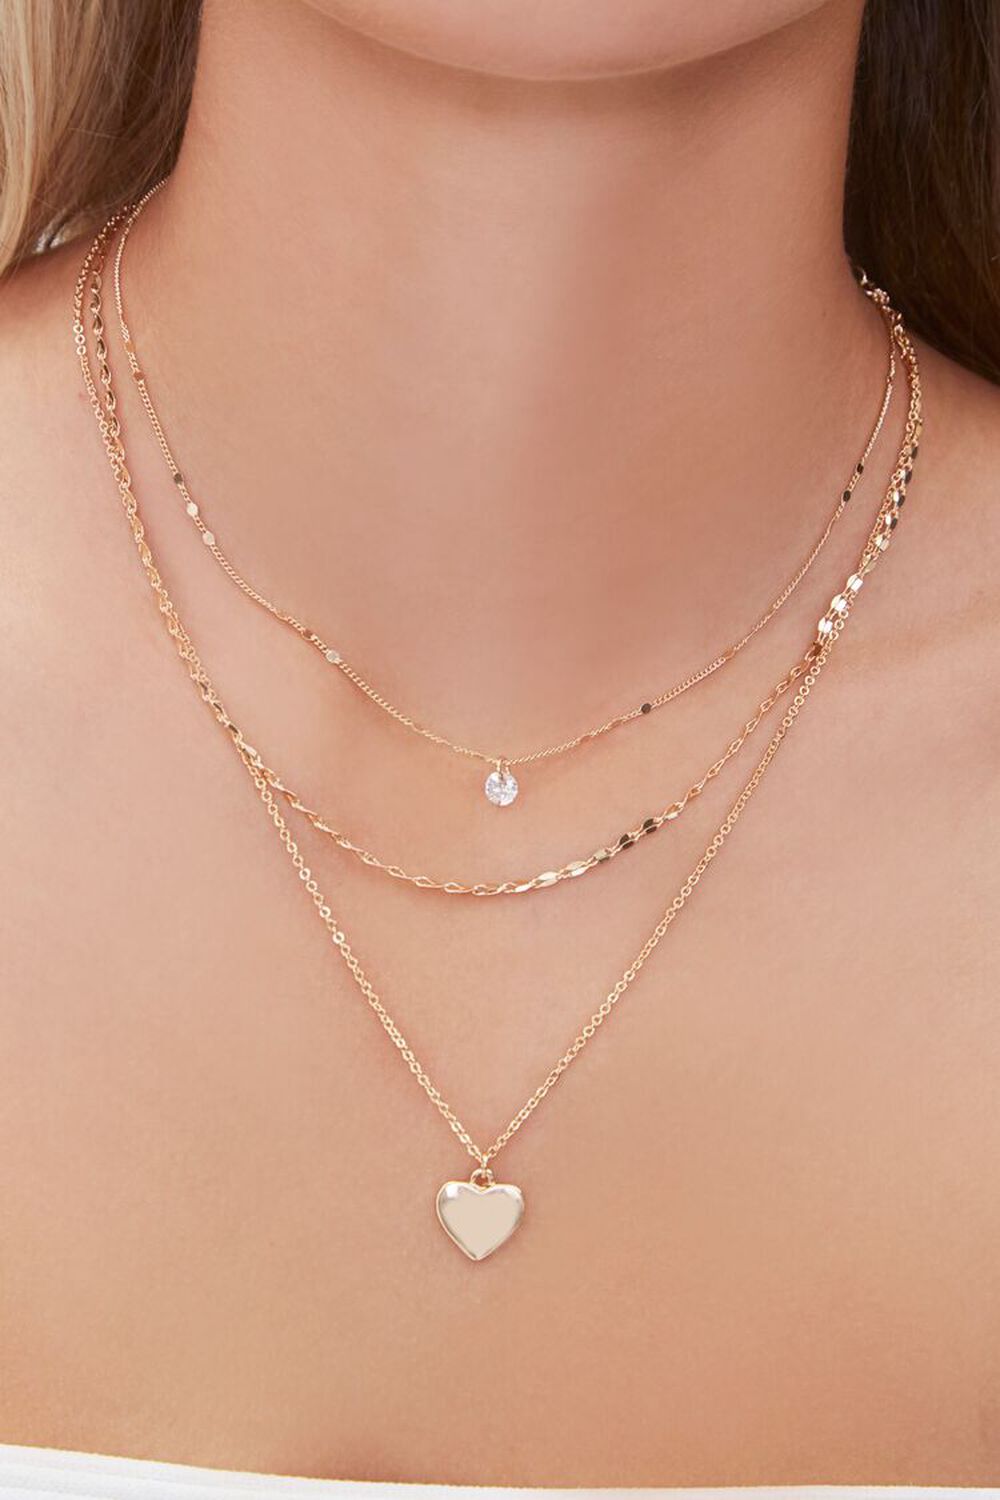 GOLD Heart Charm Layered Necklace, image 1